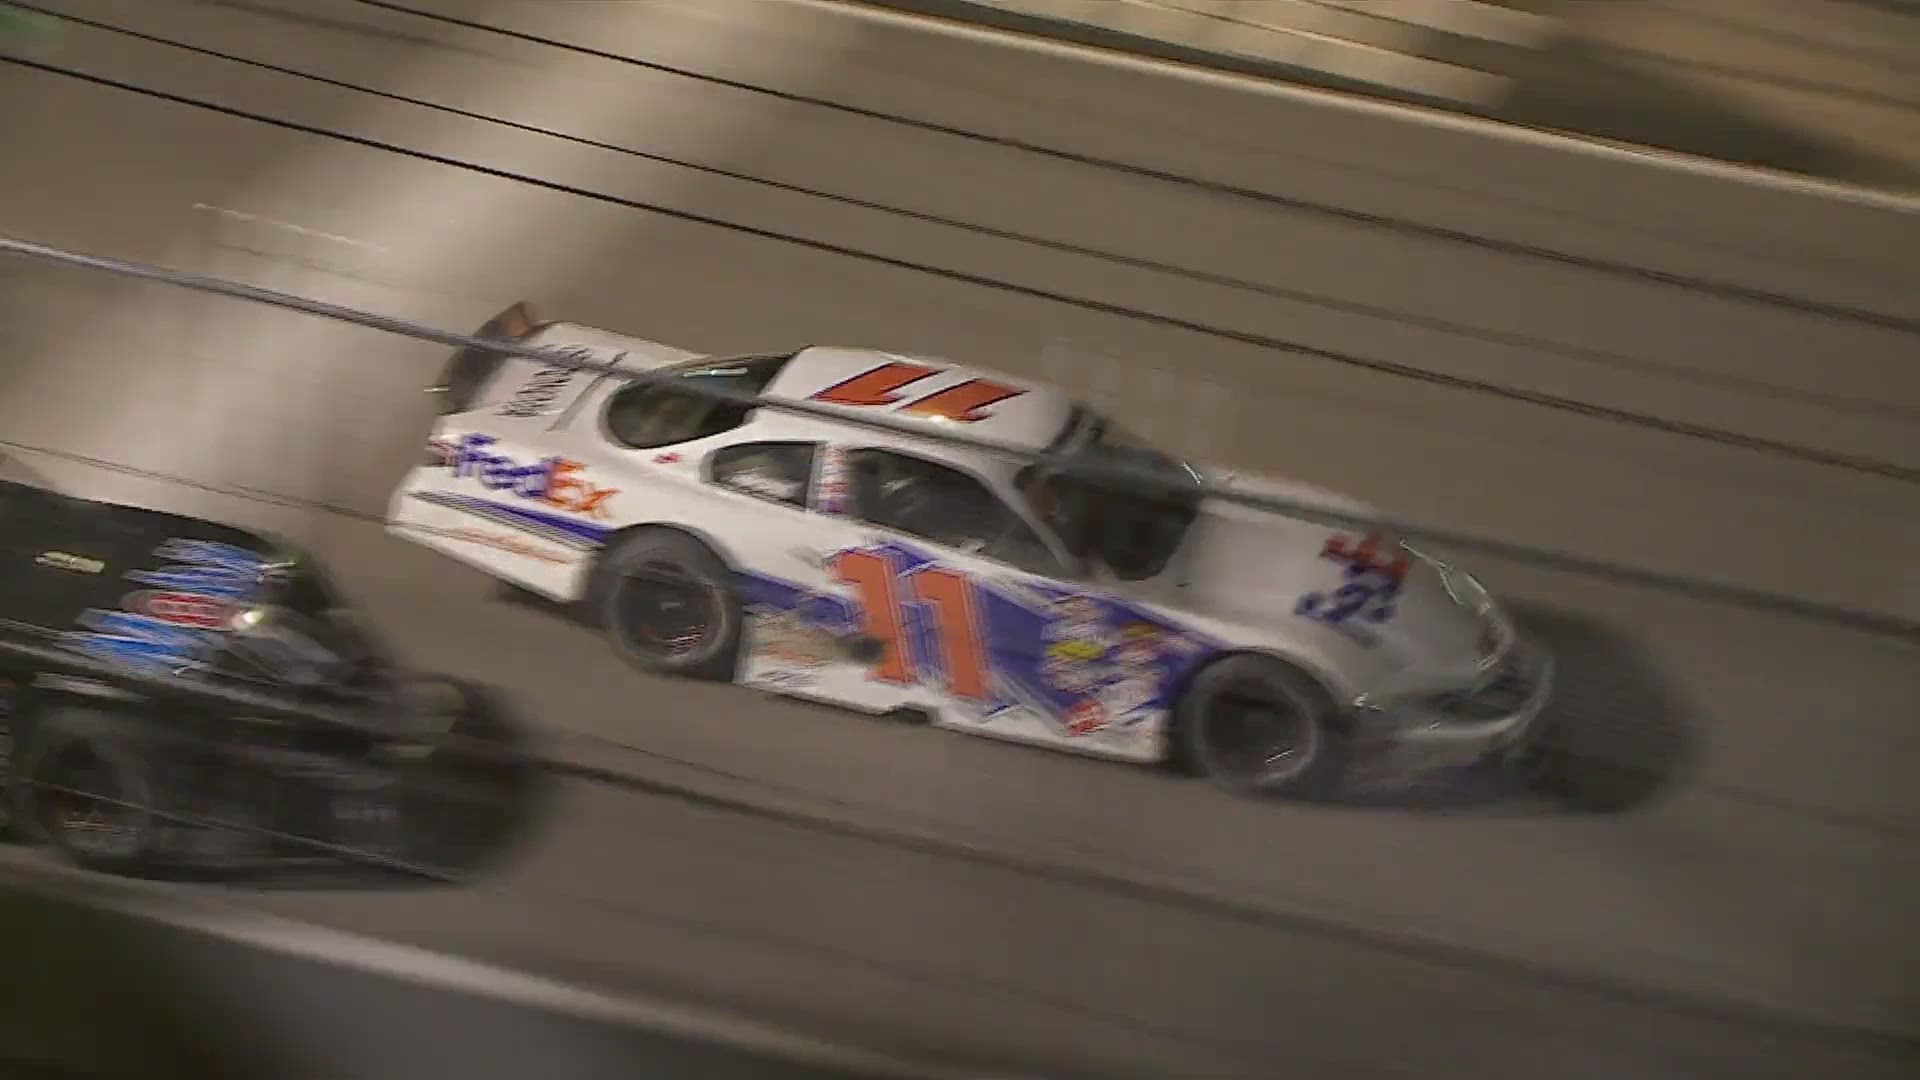 Hamlin and his Cup Series teammate, Kyle Busch finished 1-2 in the 9th running of the Denny Hamlin Short Track Showdown.